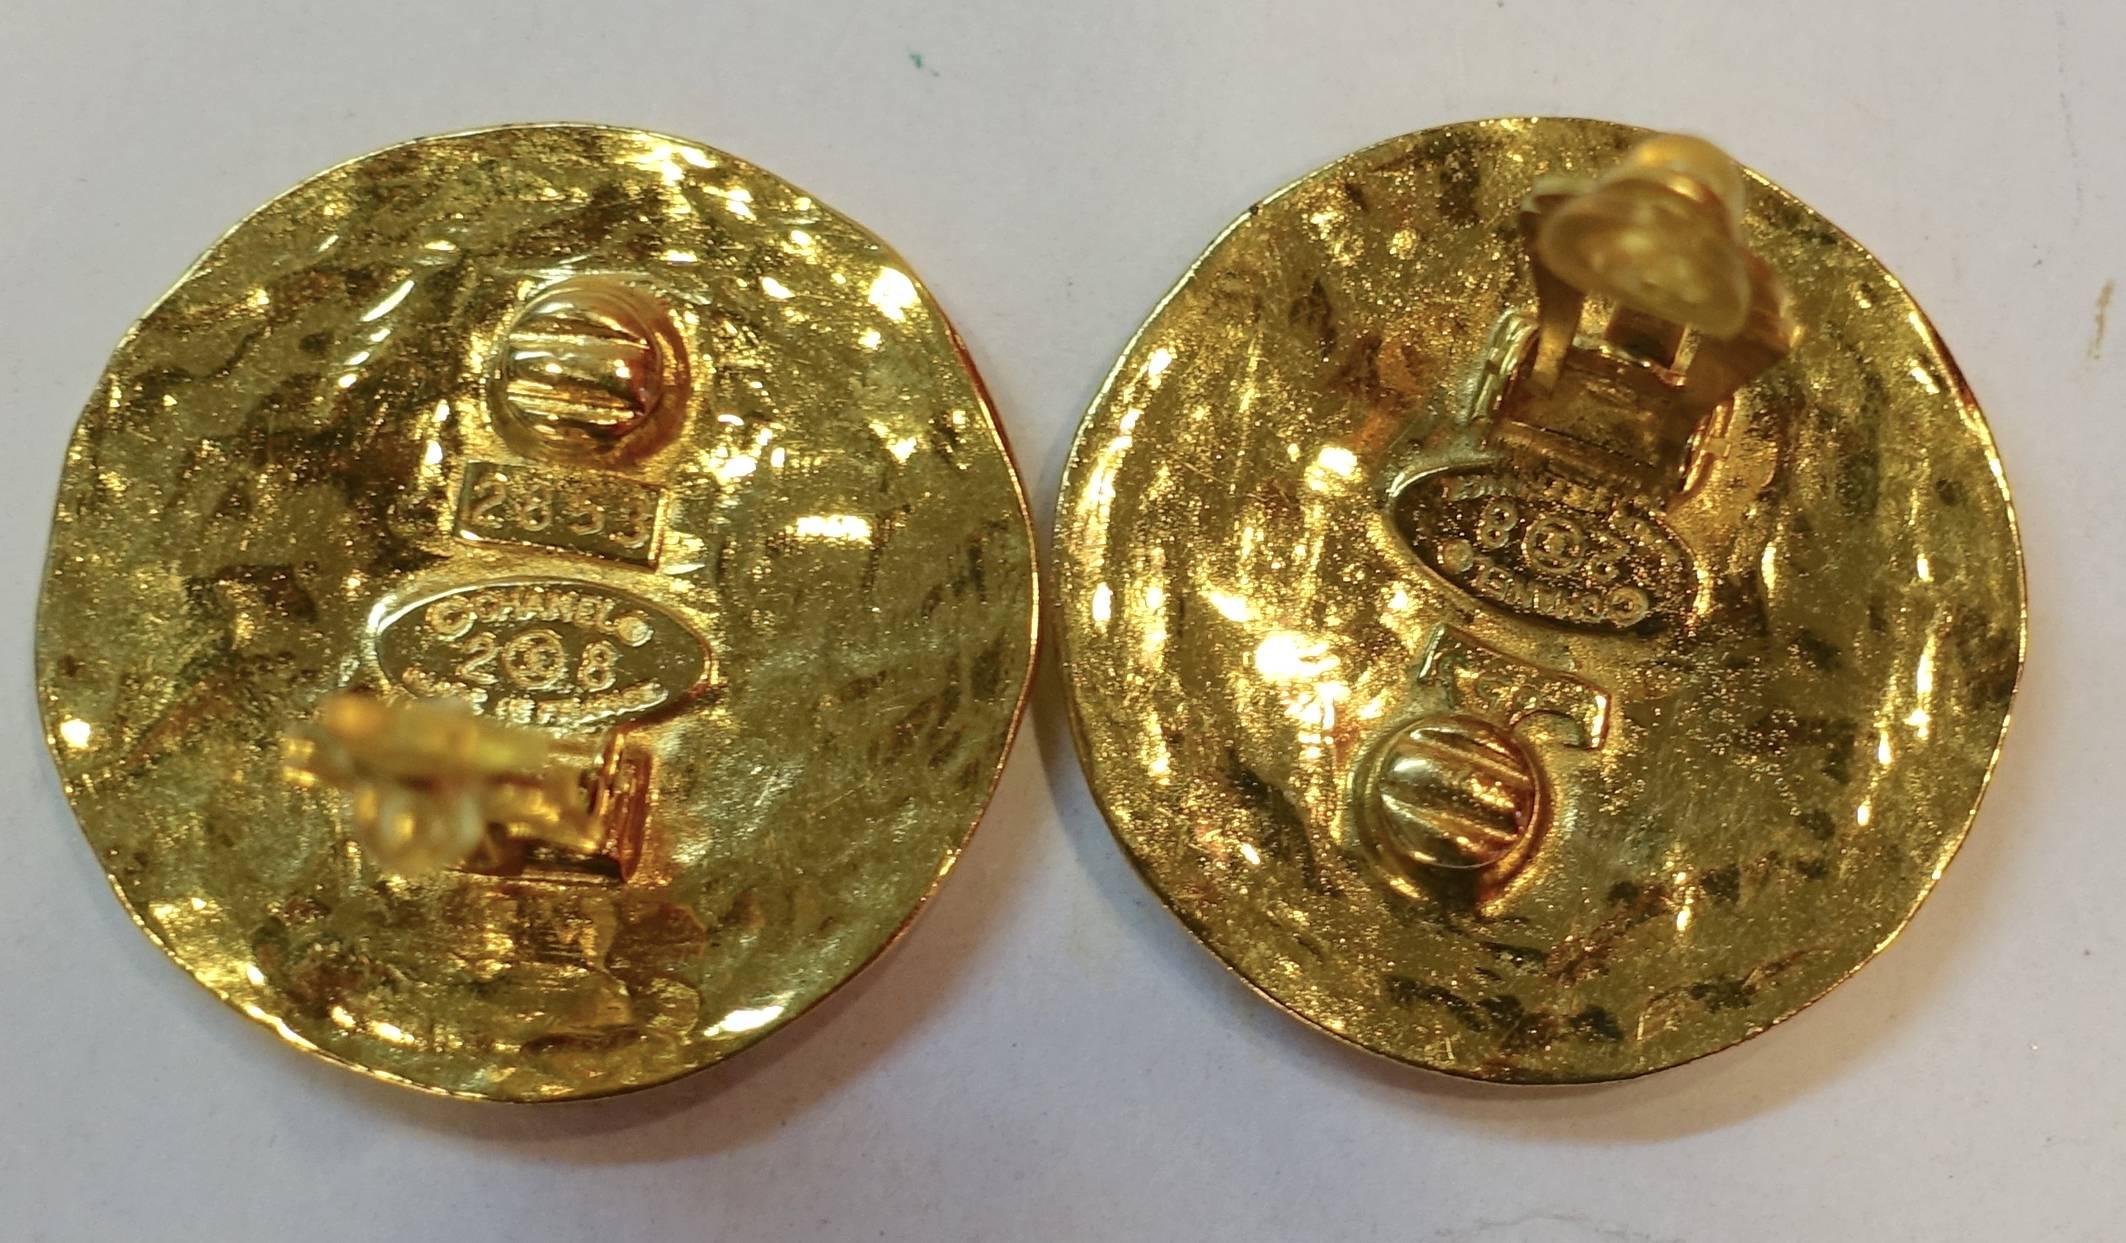 These vintage Chanel earrings are from season 28.  They are large round clips with the double Cs in the middle and Chanel Paris on the border.  They measure 1-1/2” and signed “Chanel 28 Made in France”.  They are in excellent condition.